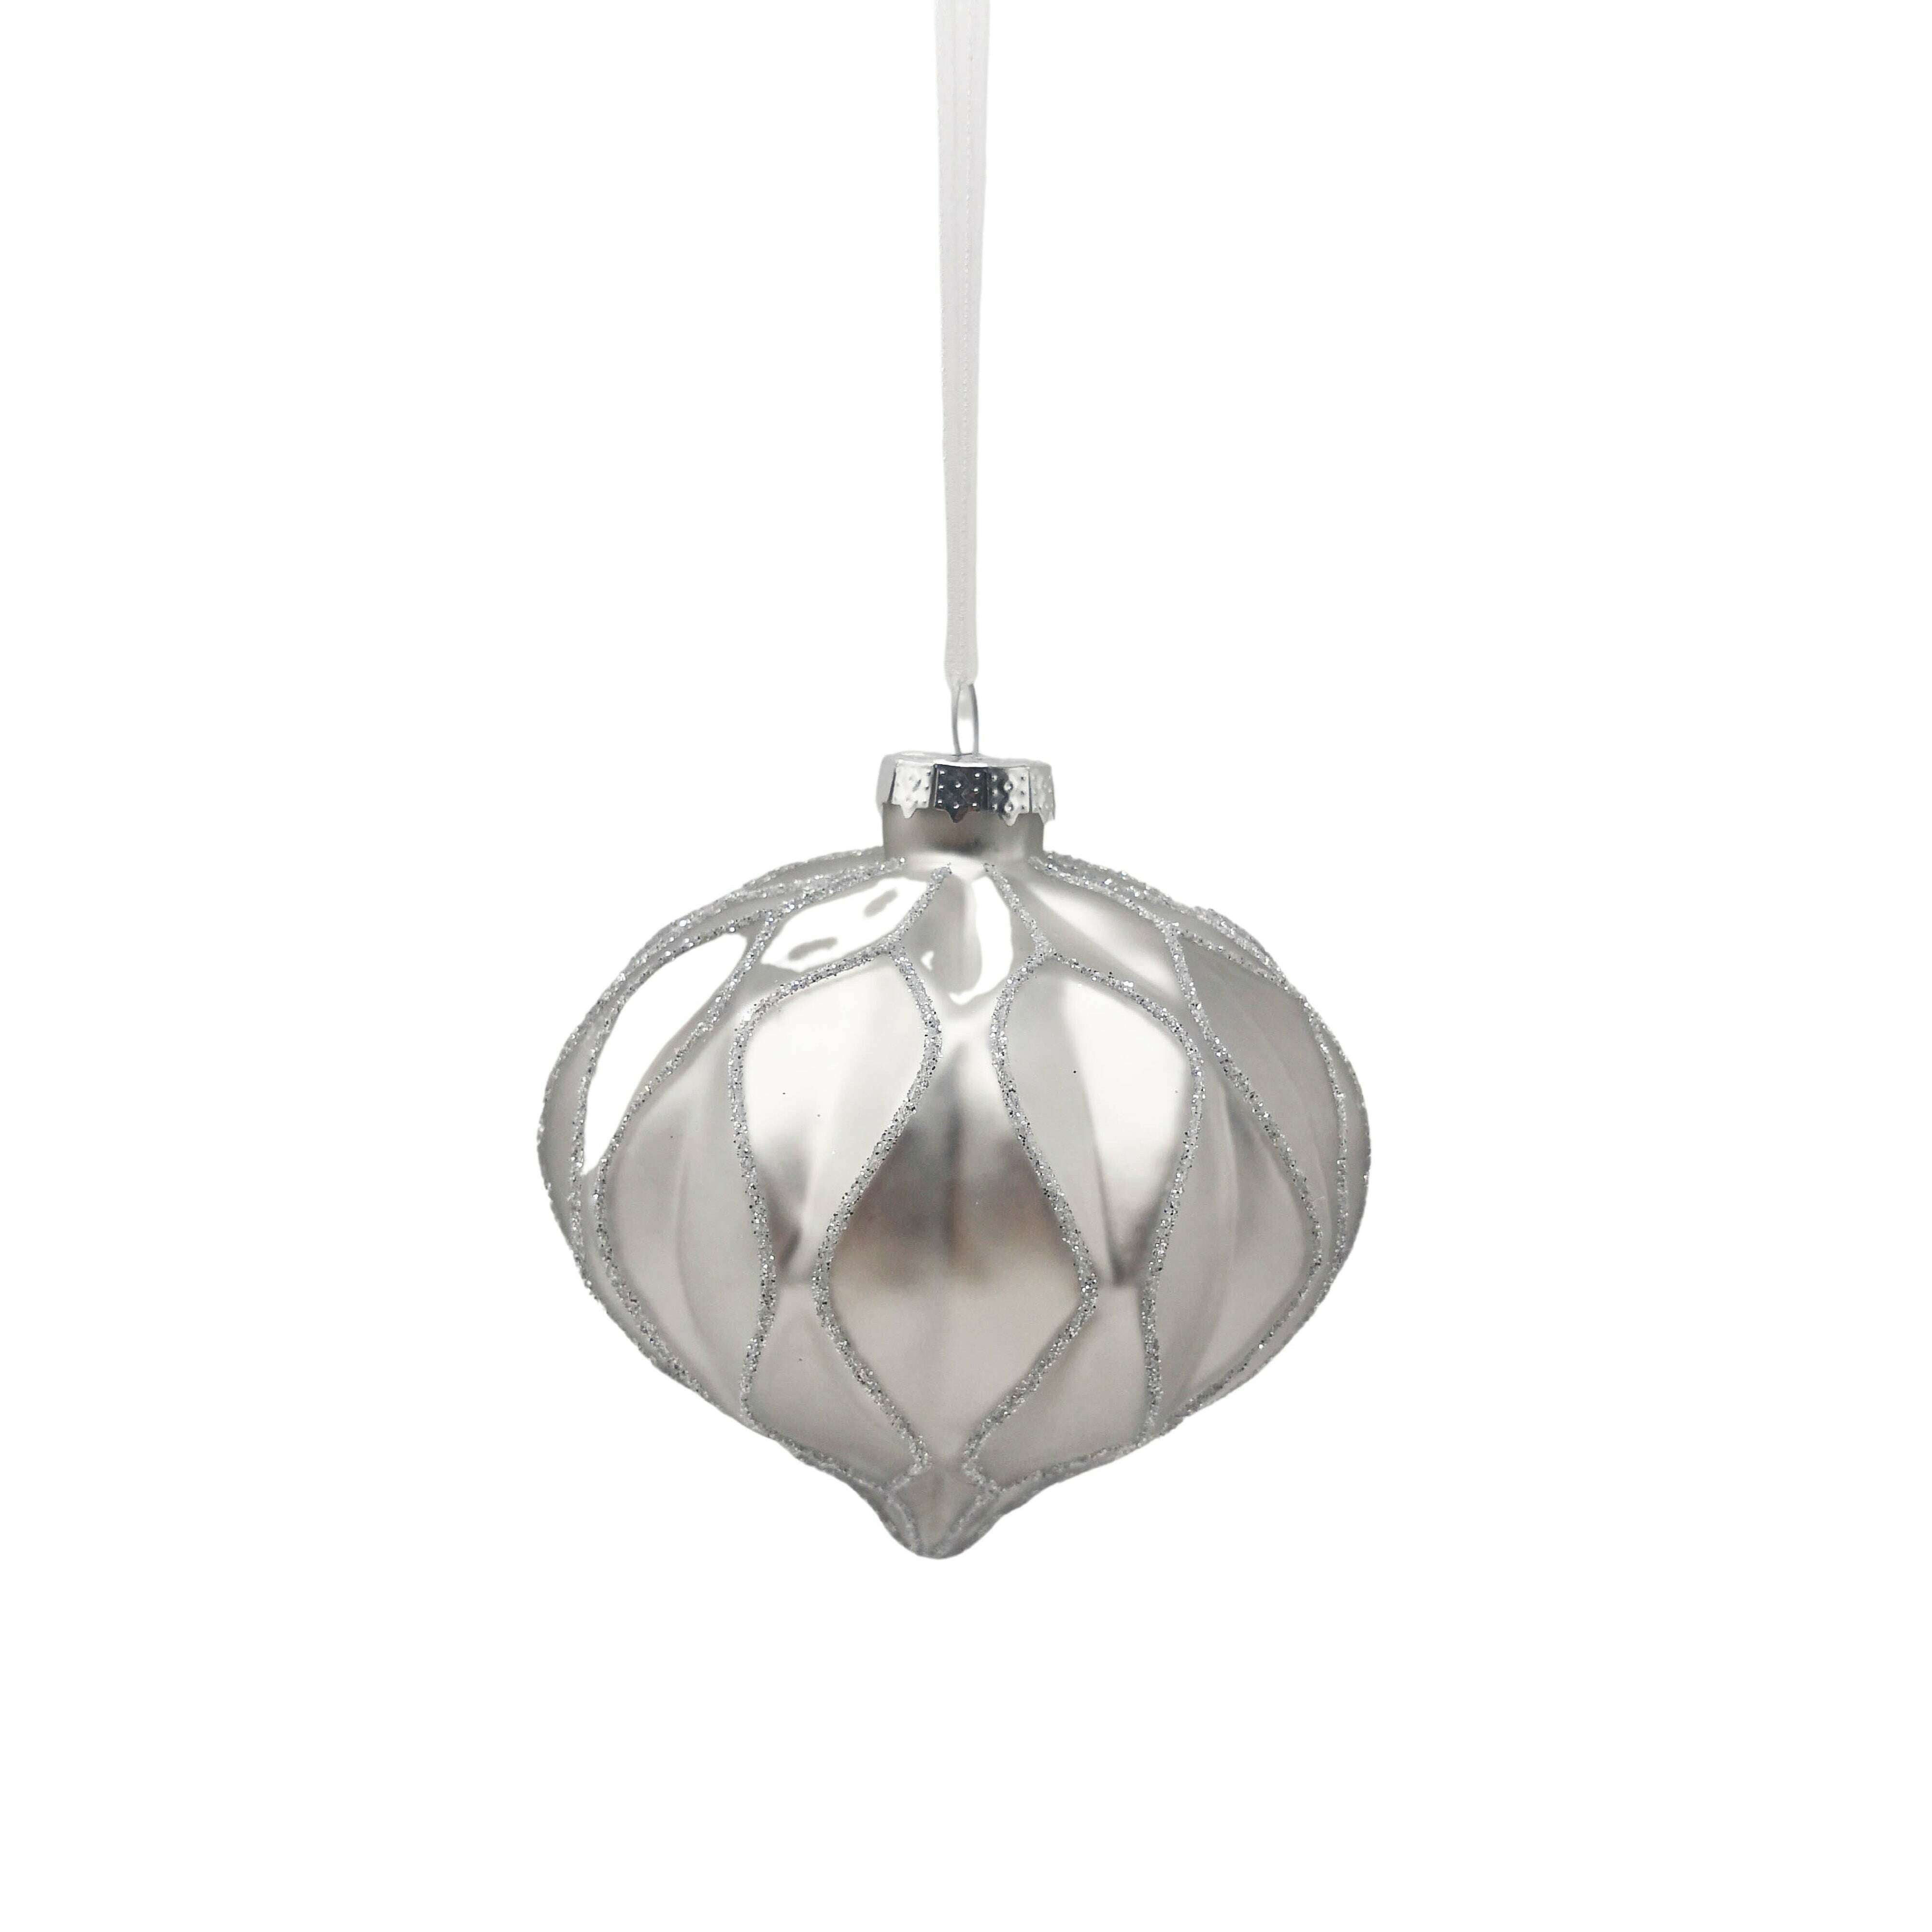 Impodimo Living & Giving:Glass Bauble - Champagne:Swing Gifts